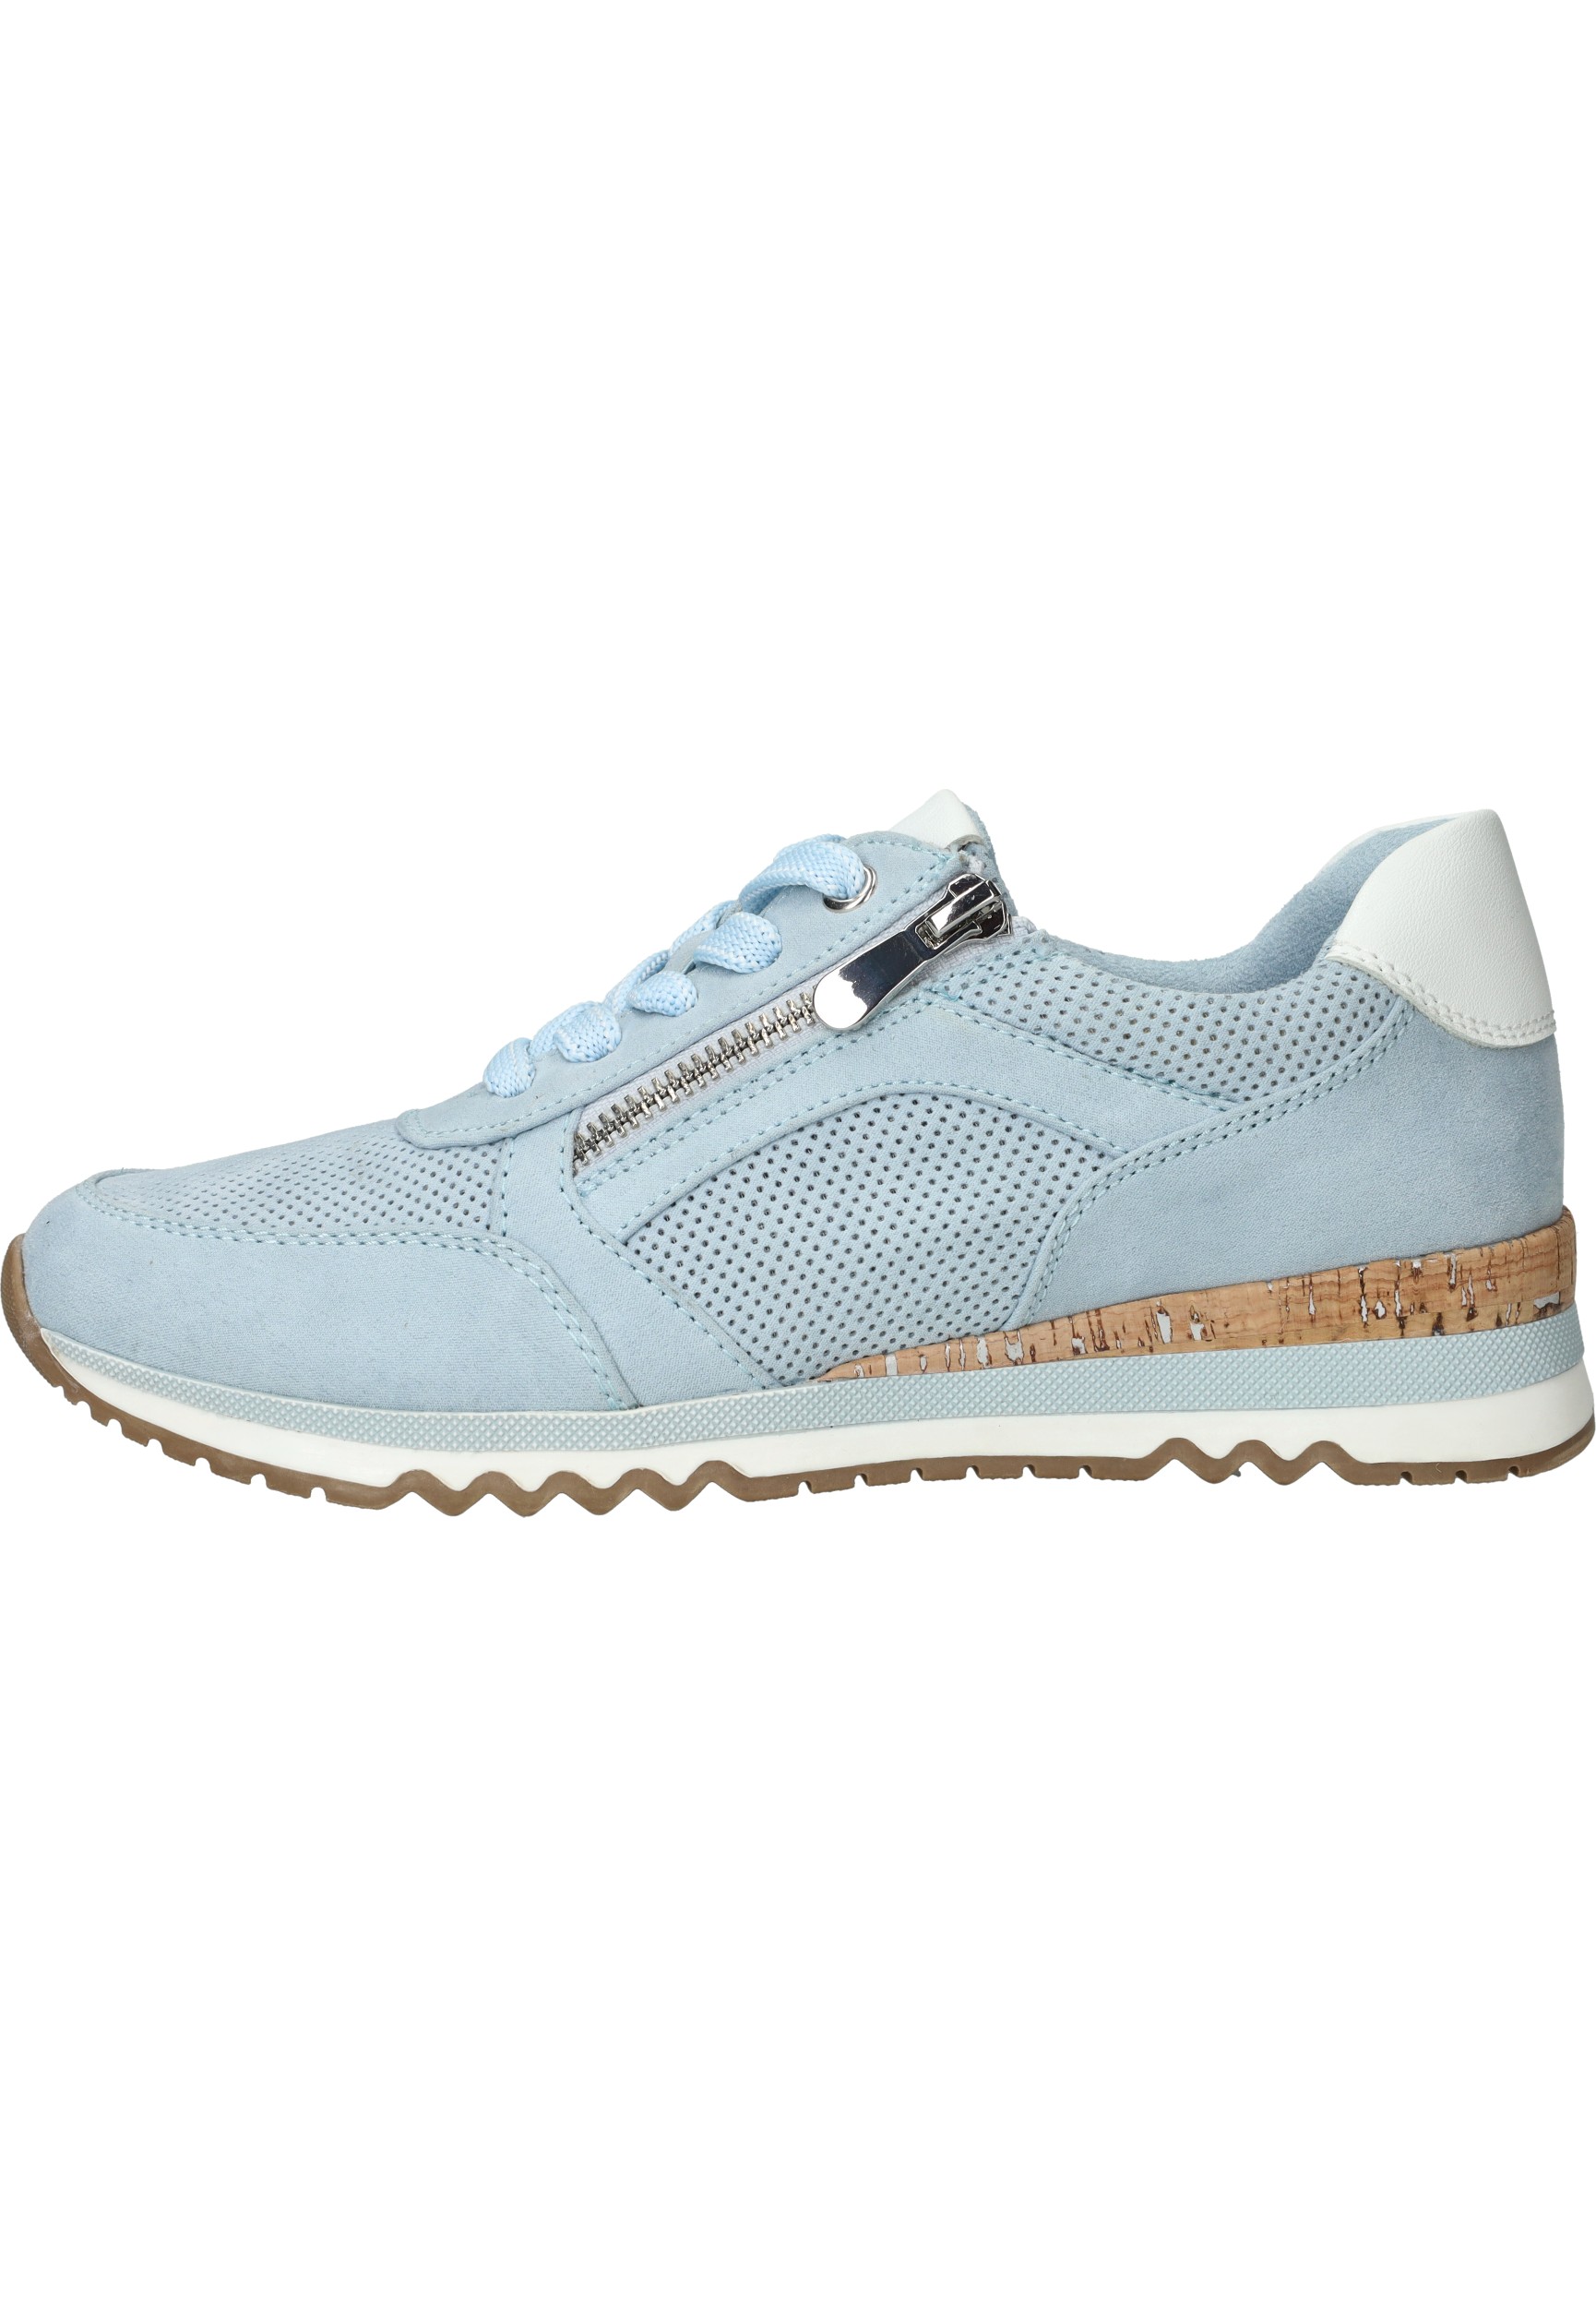 MARCO TOZZI MT Vegan, Soft Lining + Feel Me - removable insole Dames Sneaker - LIGHT BLUE/WHITE - Maat 36